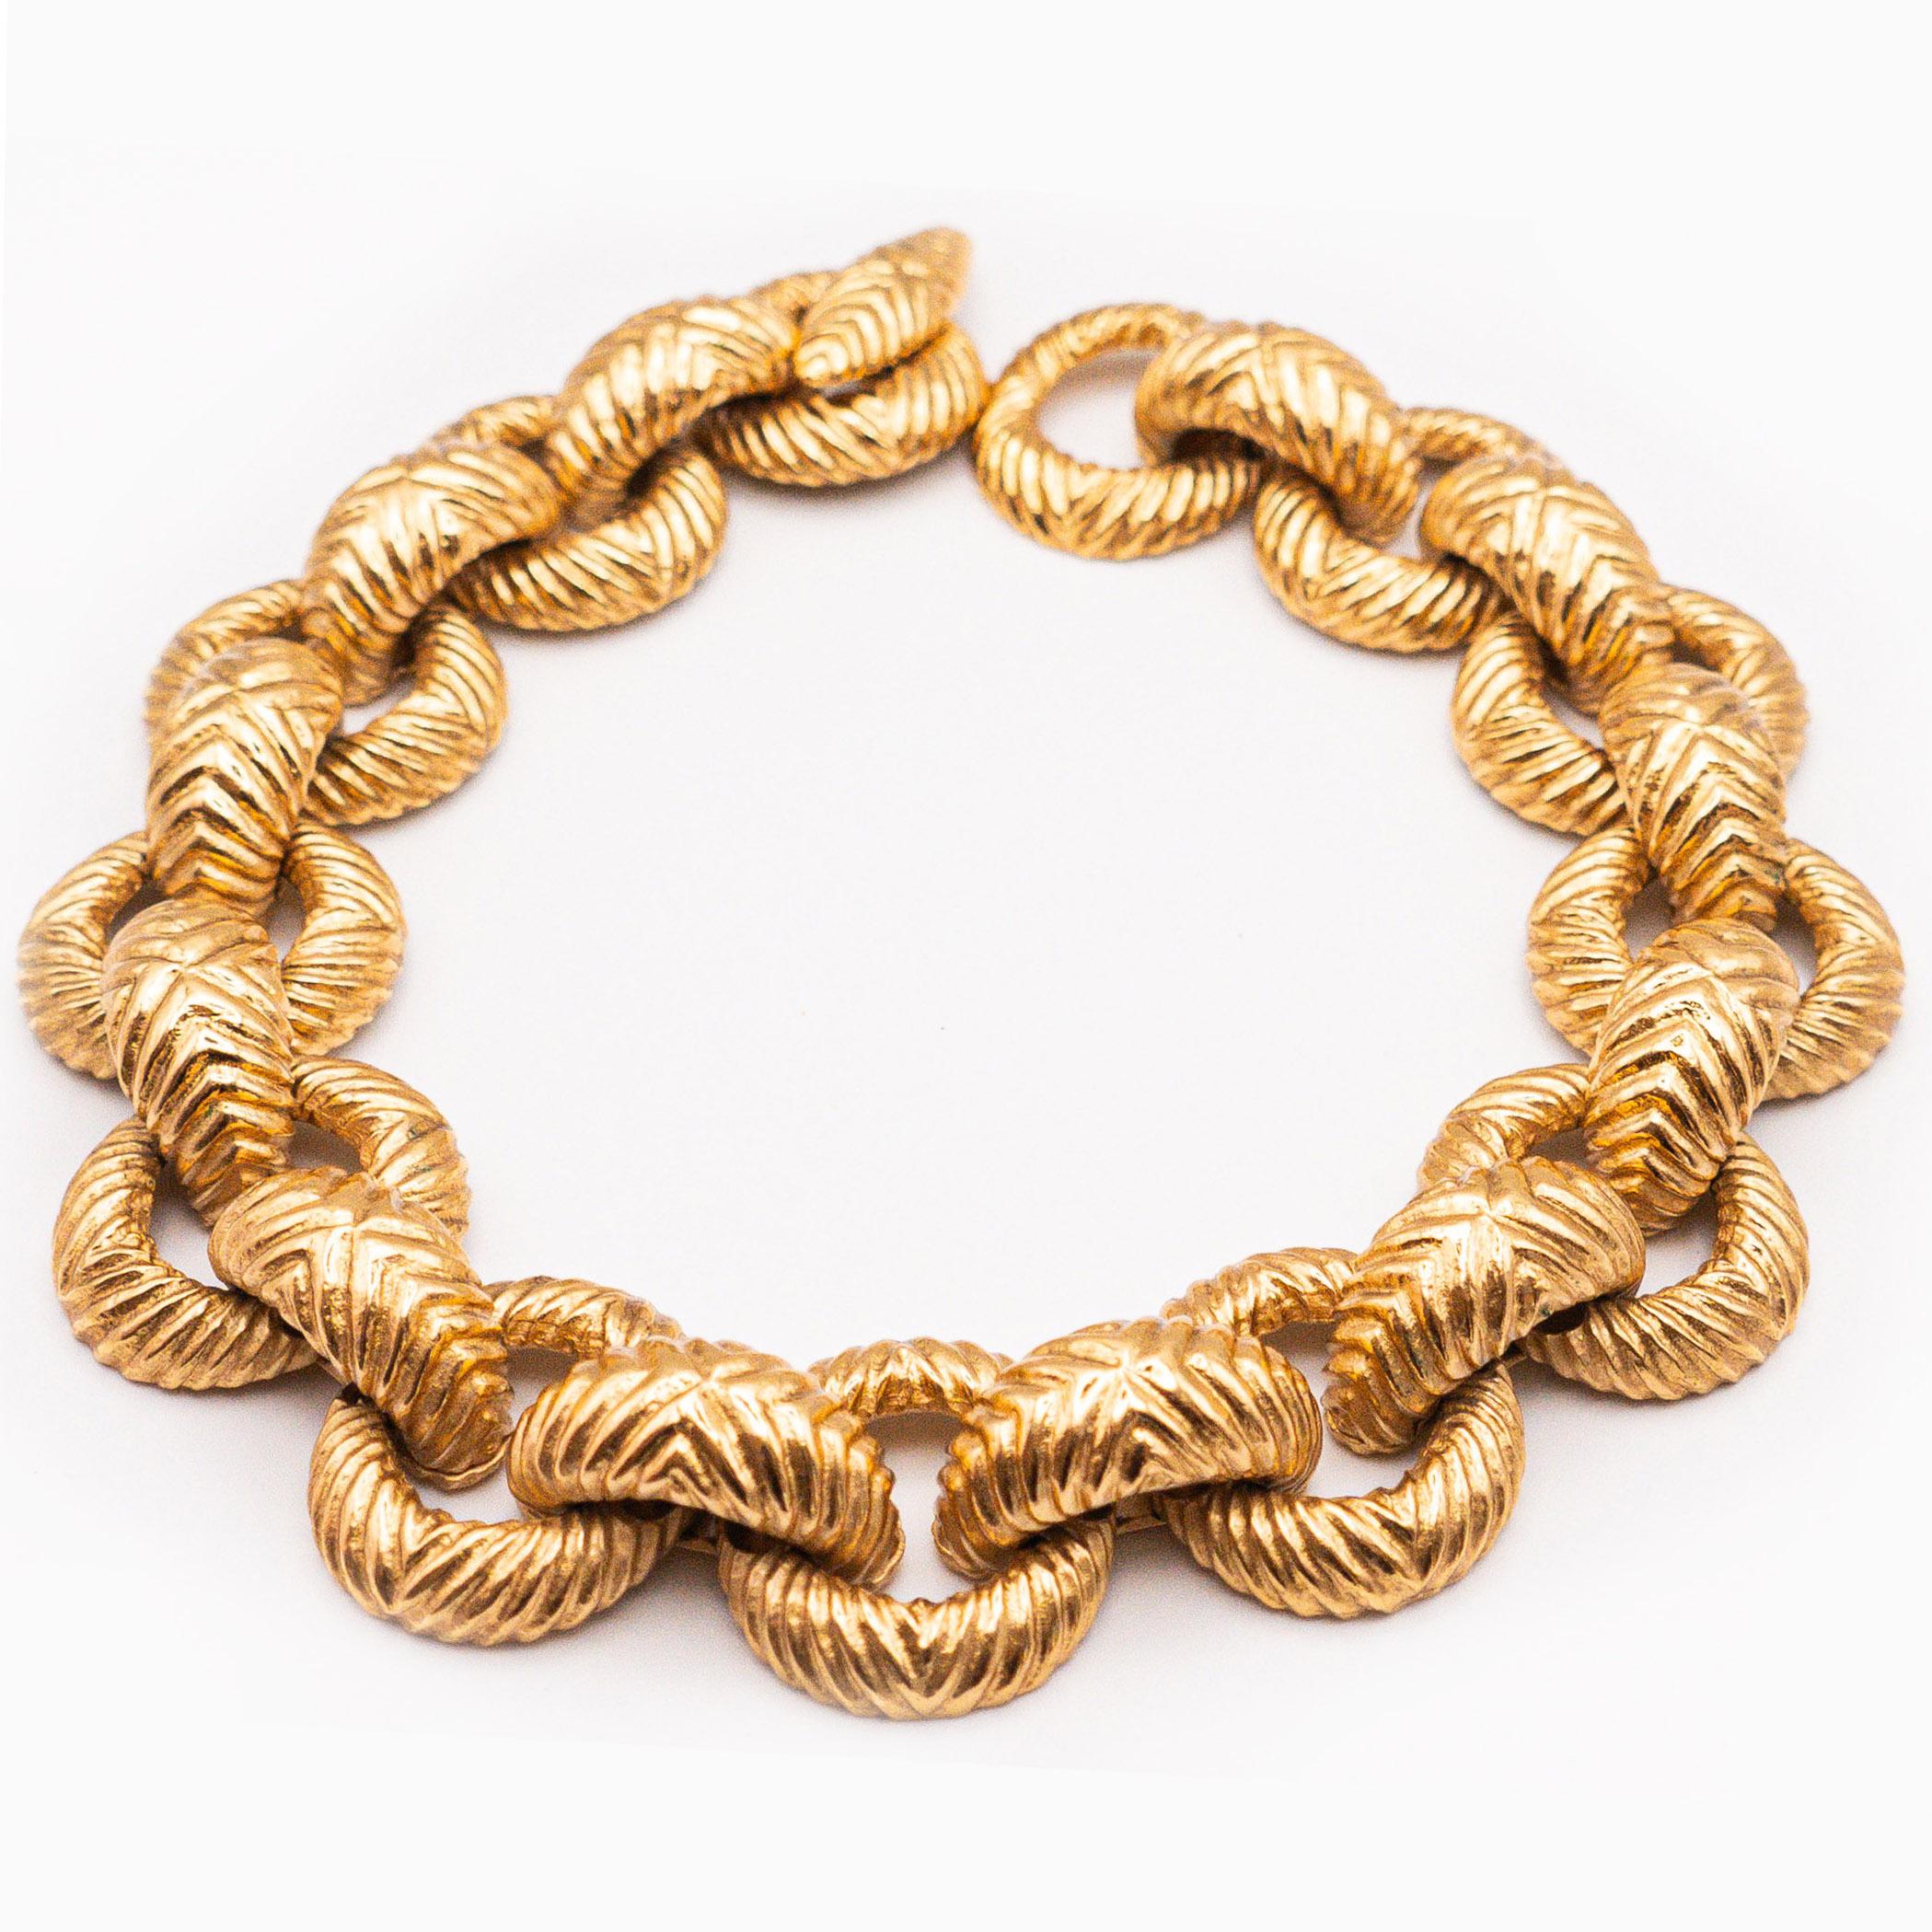 Oversized Links Necklace designed by Yves Saint Laurent and made by Maison Goossens

L : 83 cm
Circa 1980